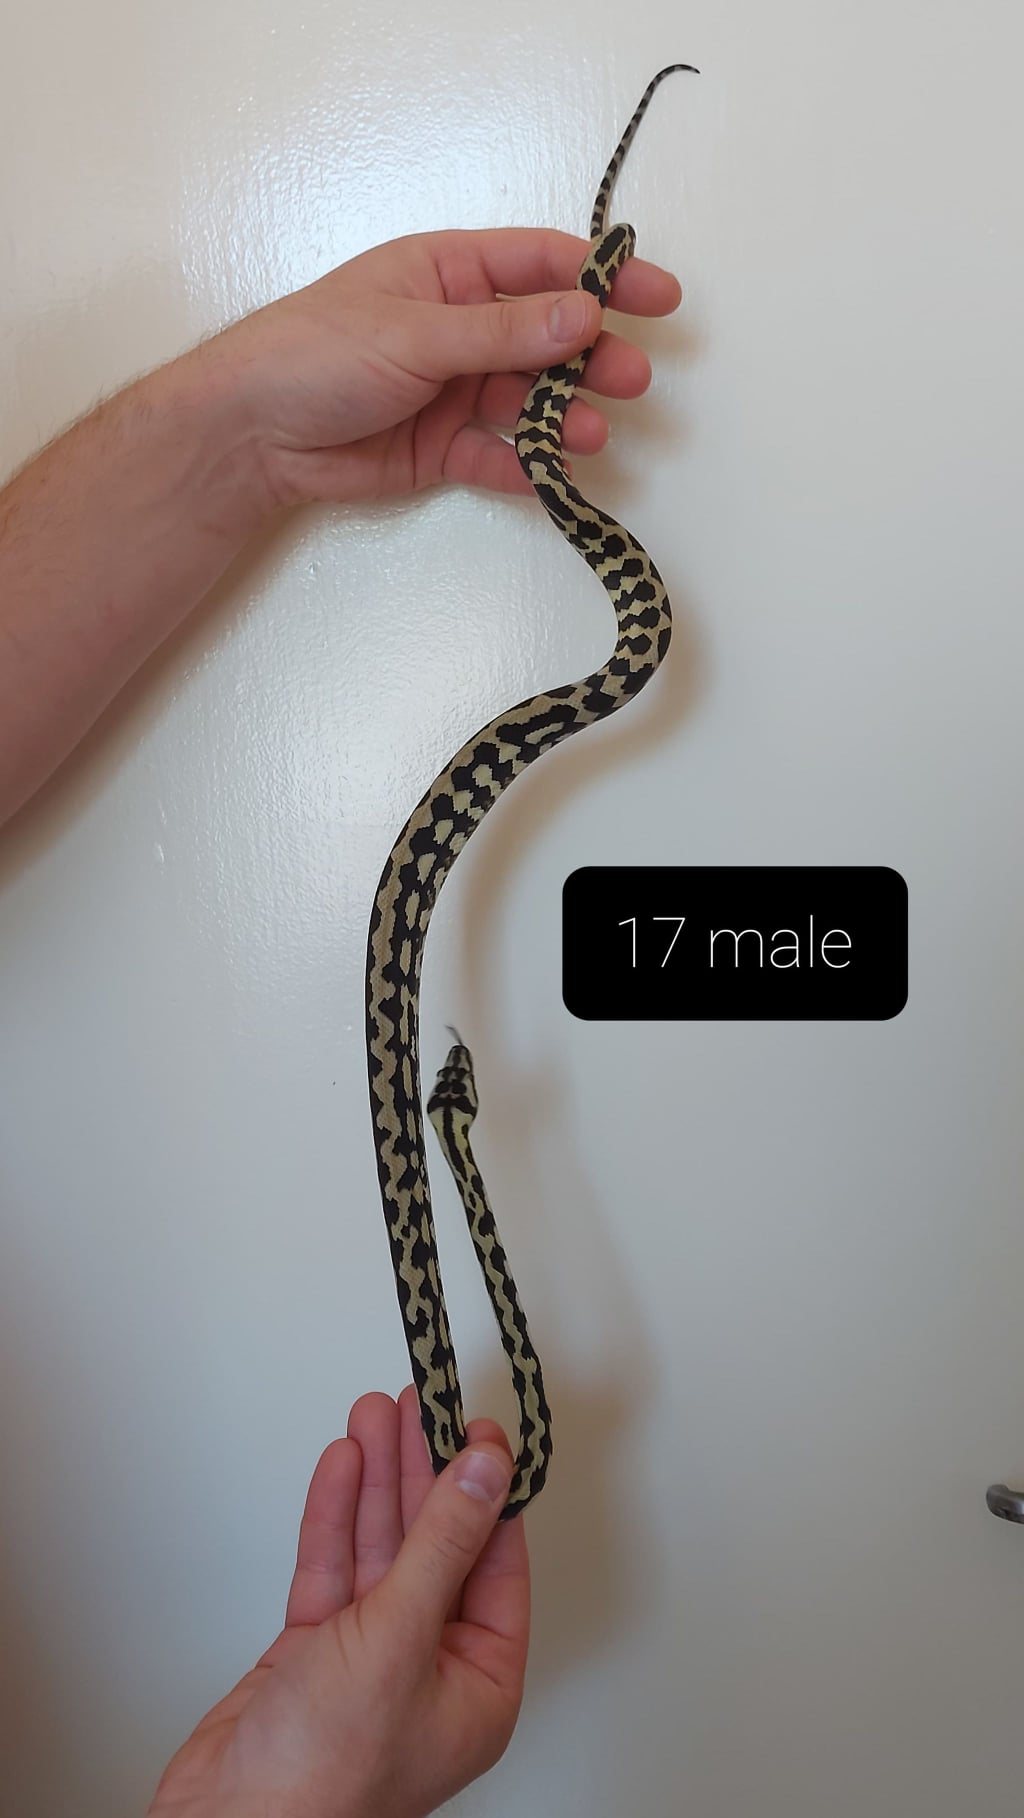 Normal Other Carpet Python by Tony'snakes